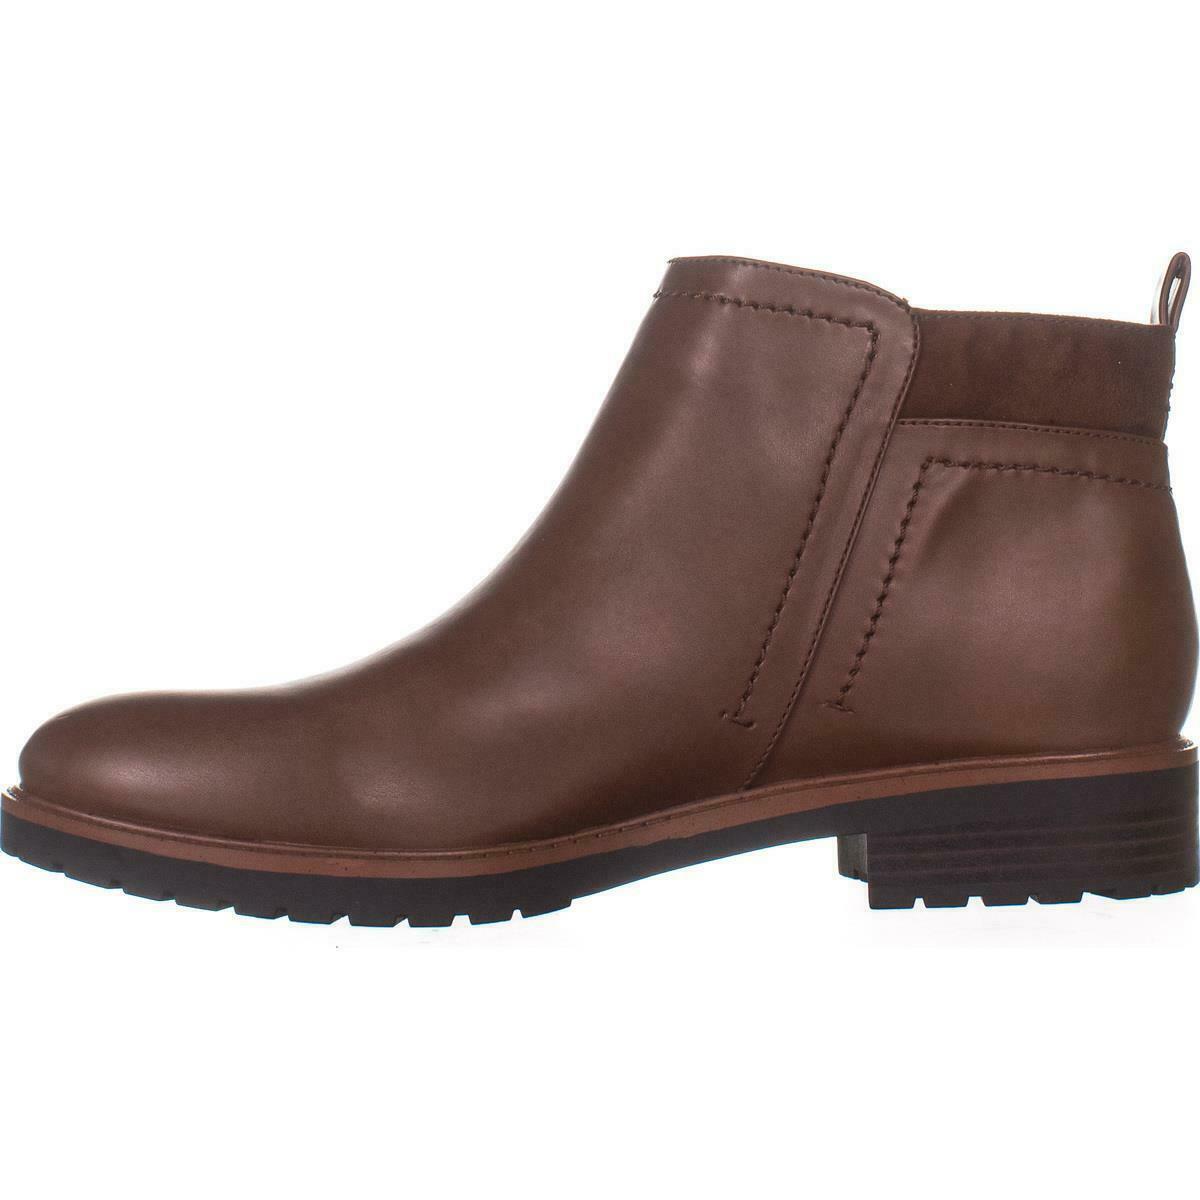 Tommy Hilfiger Fawn2 Zip Ankle Boots, Medium Brown - Boots